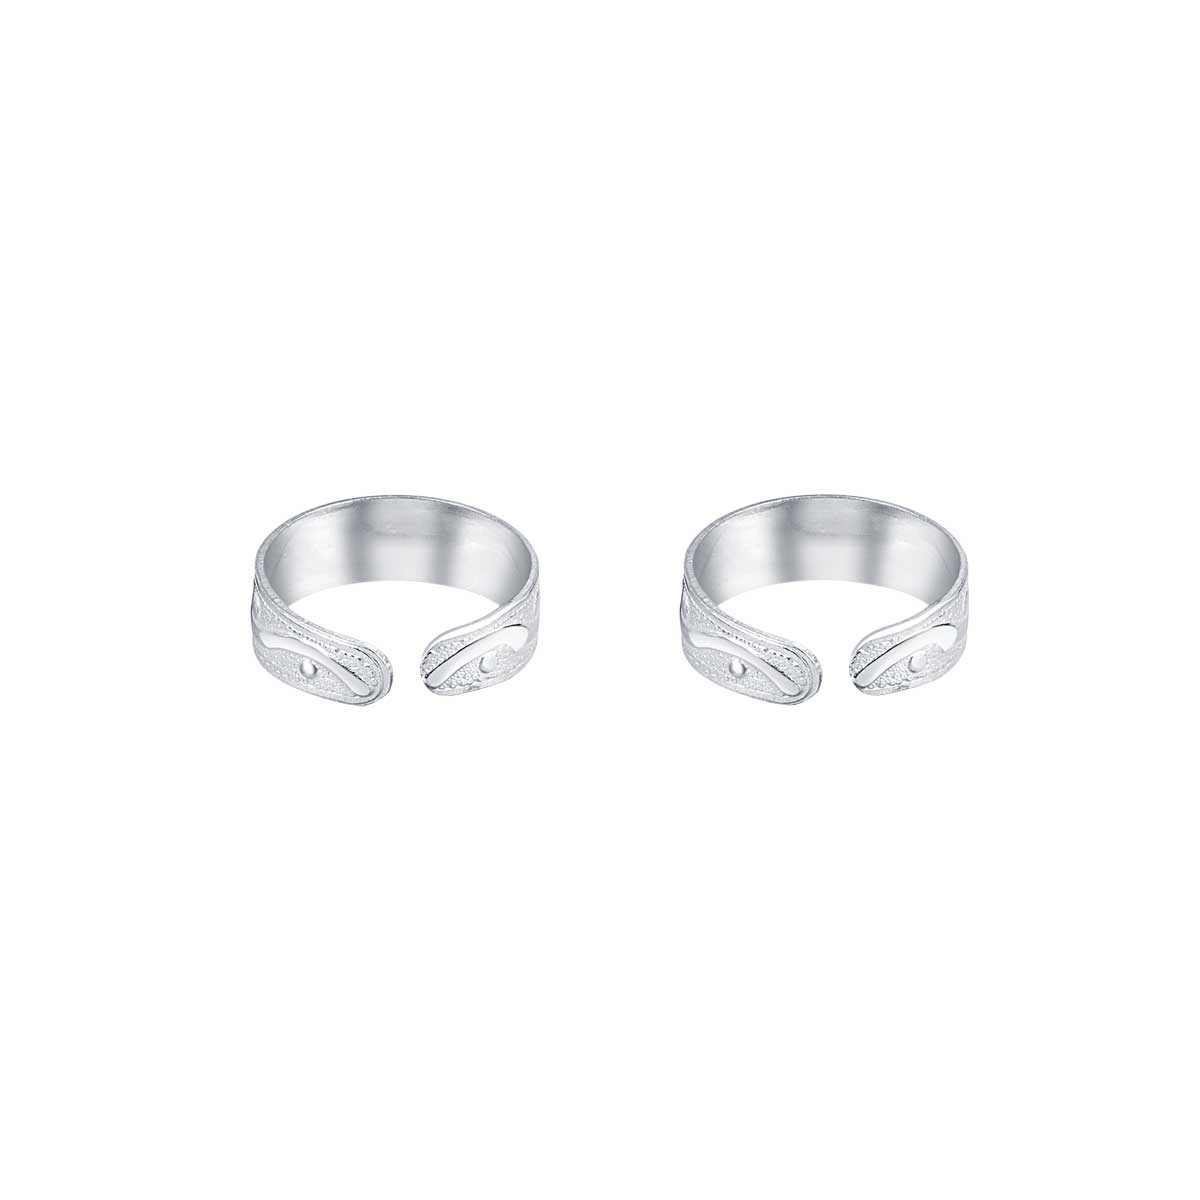 This stylish Sterling silver toe ring for women features a beautiful swirly wave design, adding a touch of elegance to your look. With its silver finish, it is the perfect accessory for any outfit. Give your toes some love with the Wavy Swirl Toe Ring.